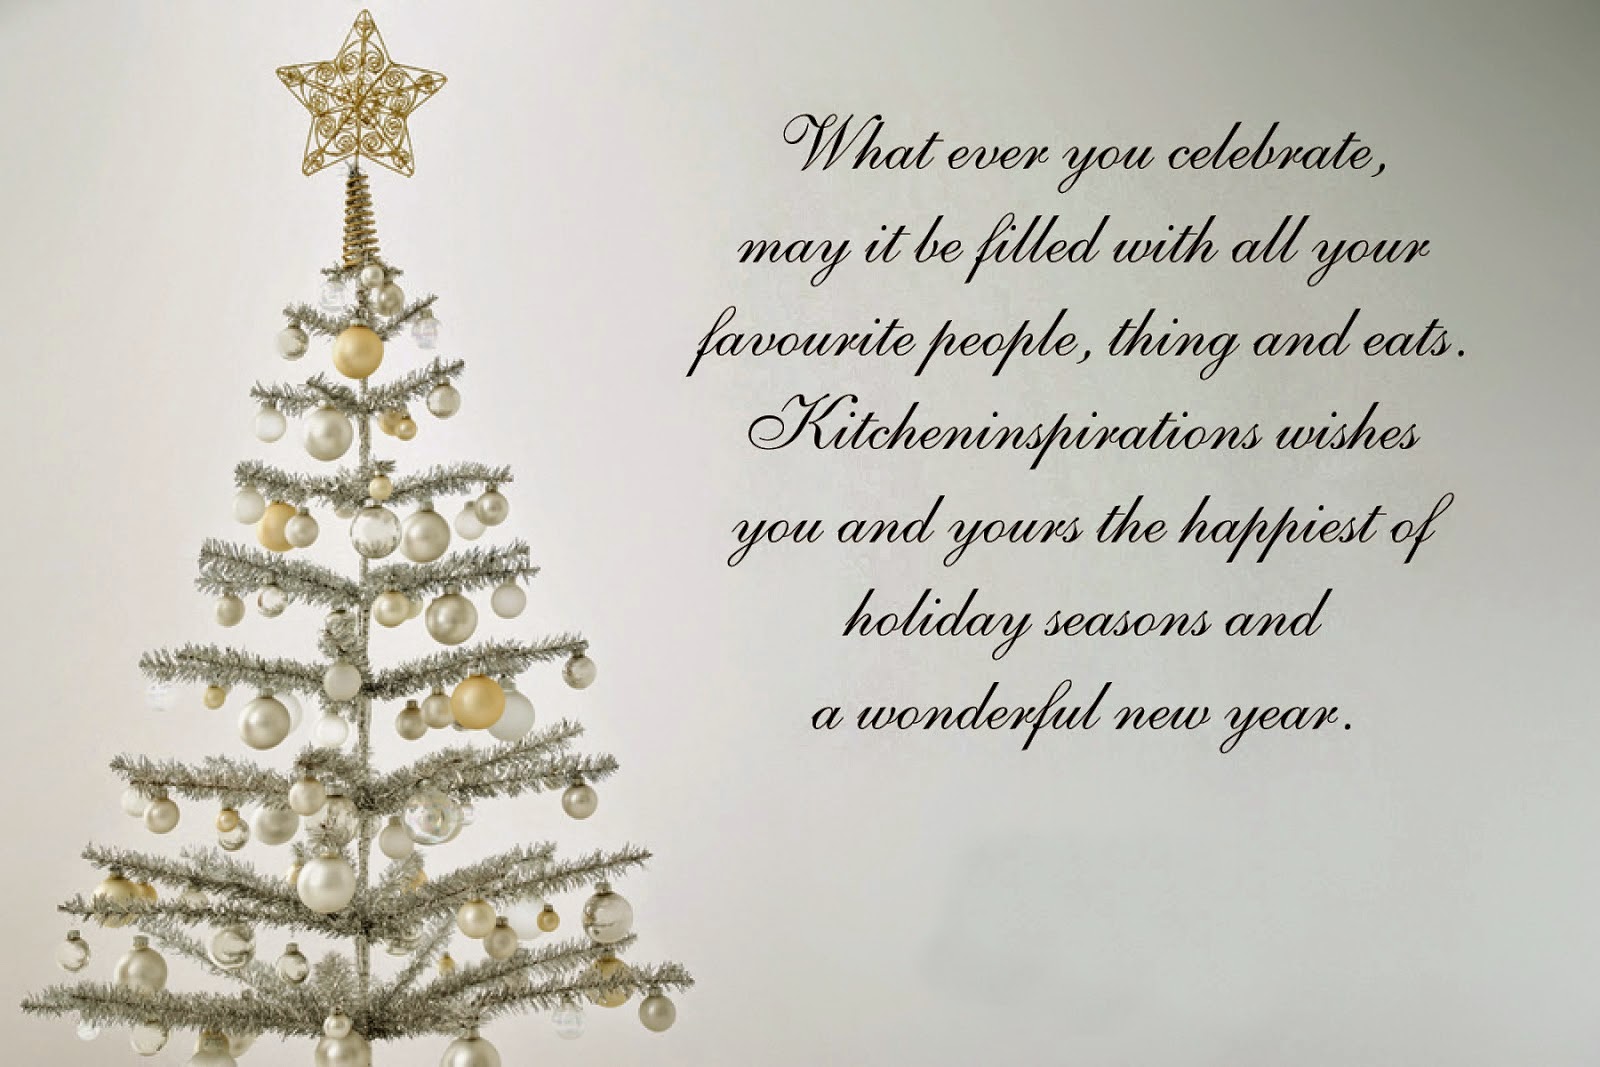 quotes-sayings-merry-christmas-eve-quotesgram